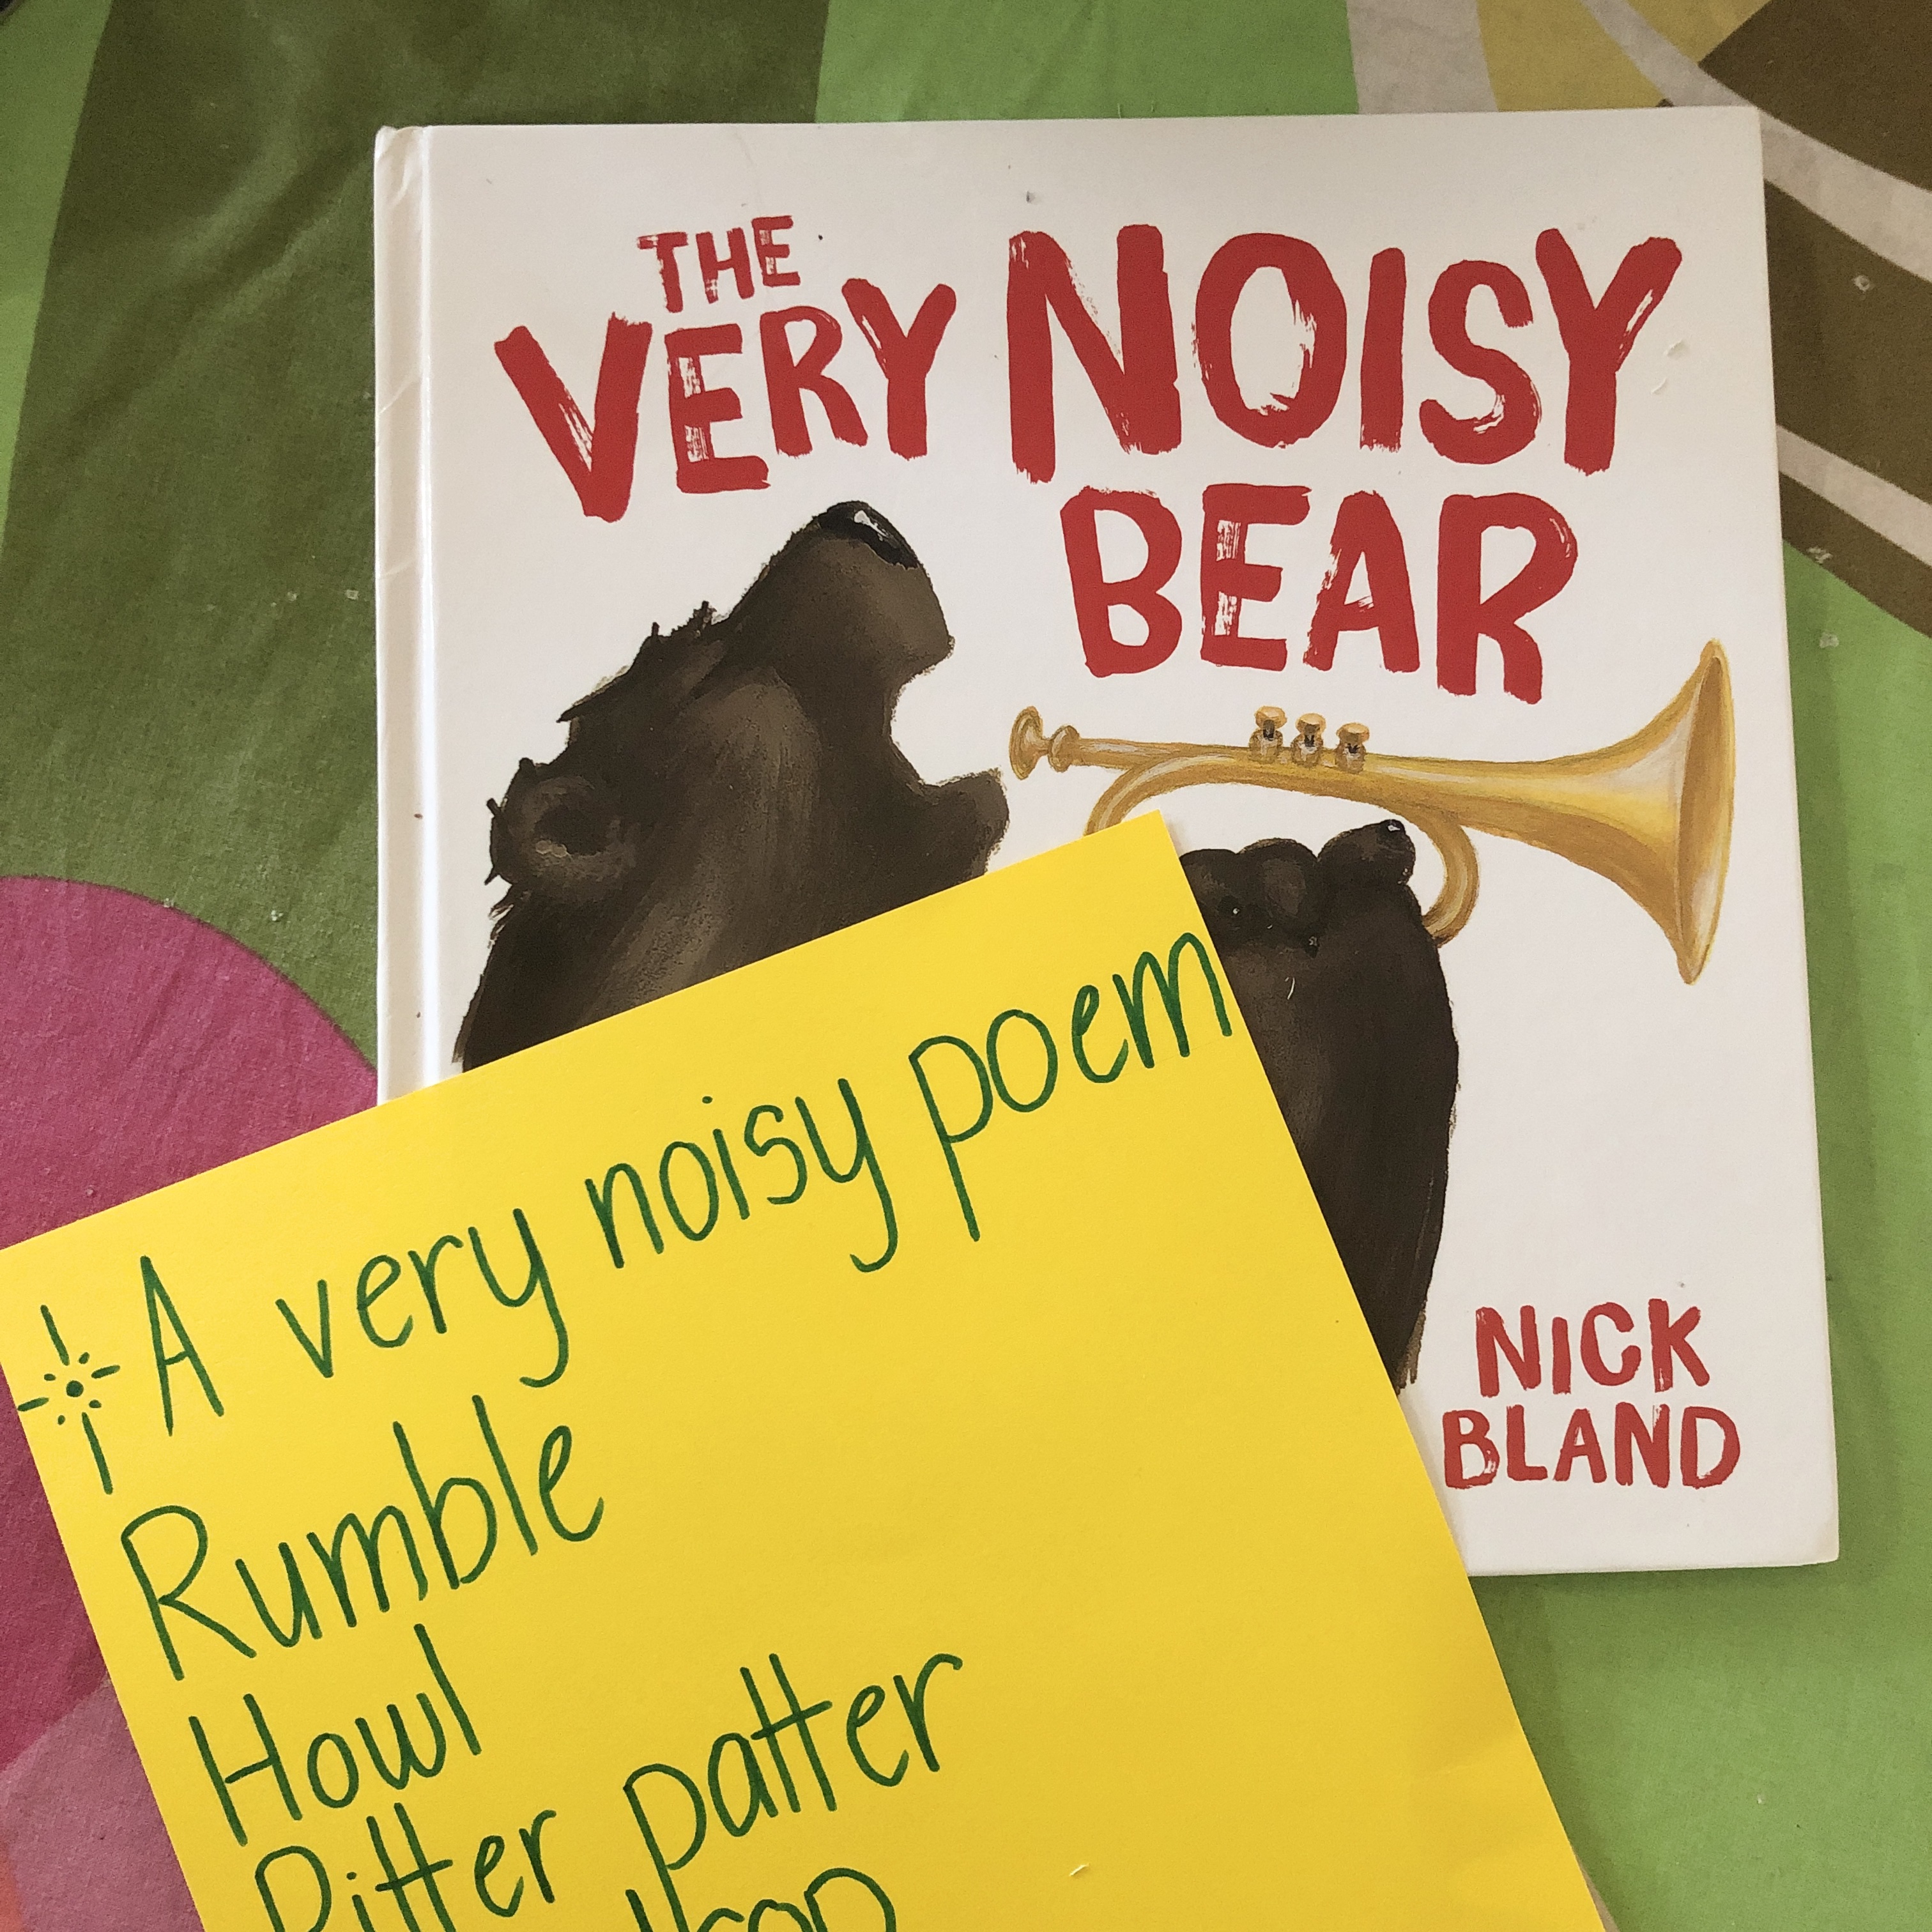 Fun reading activities using Nick Bland's fabulous book ‘The Very Noisy Bear’. A wonderful book with rich language to teach poetic devices.